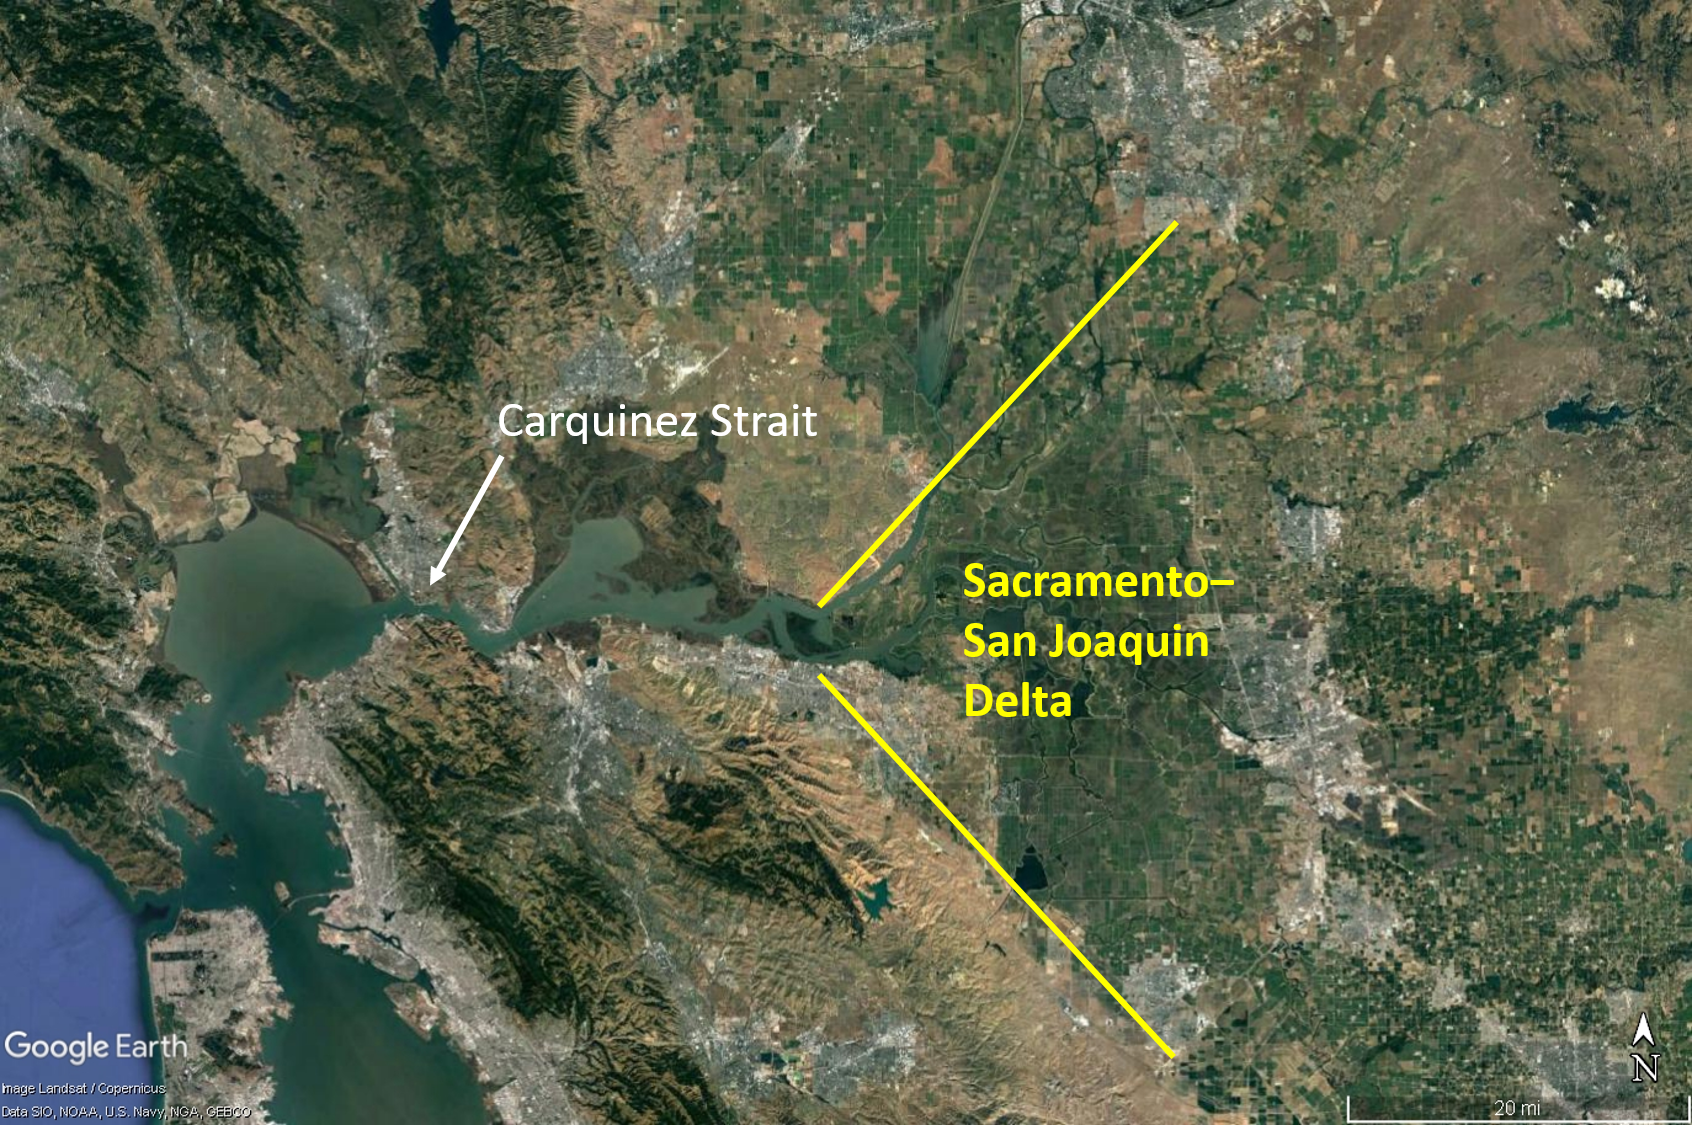 The Sacramento–San Joaquin Delta is an “inverted” delta and forms the approximate shape of an inverted triangle.